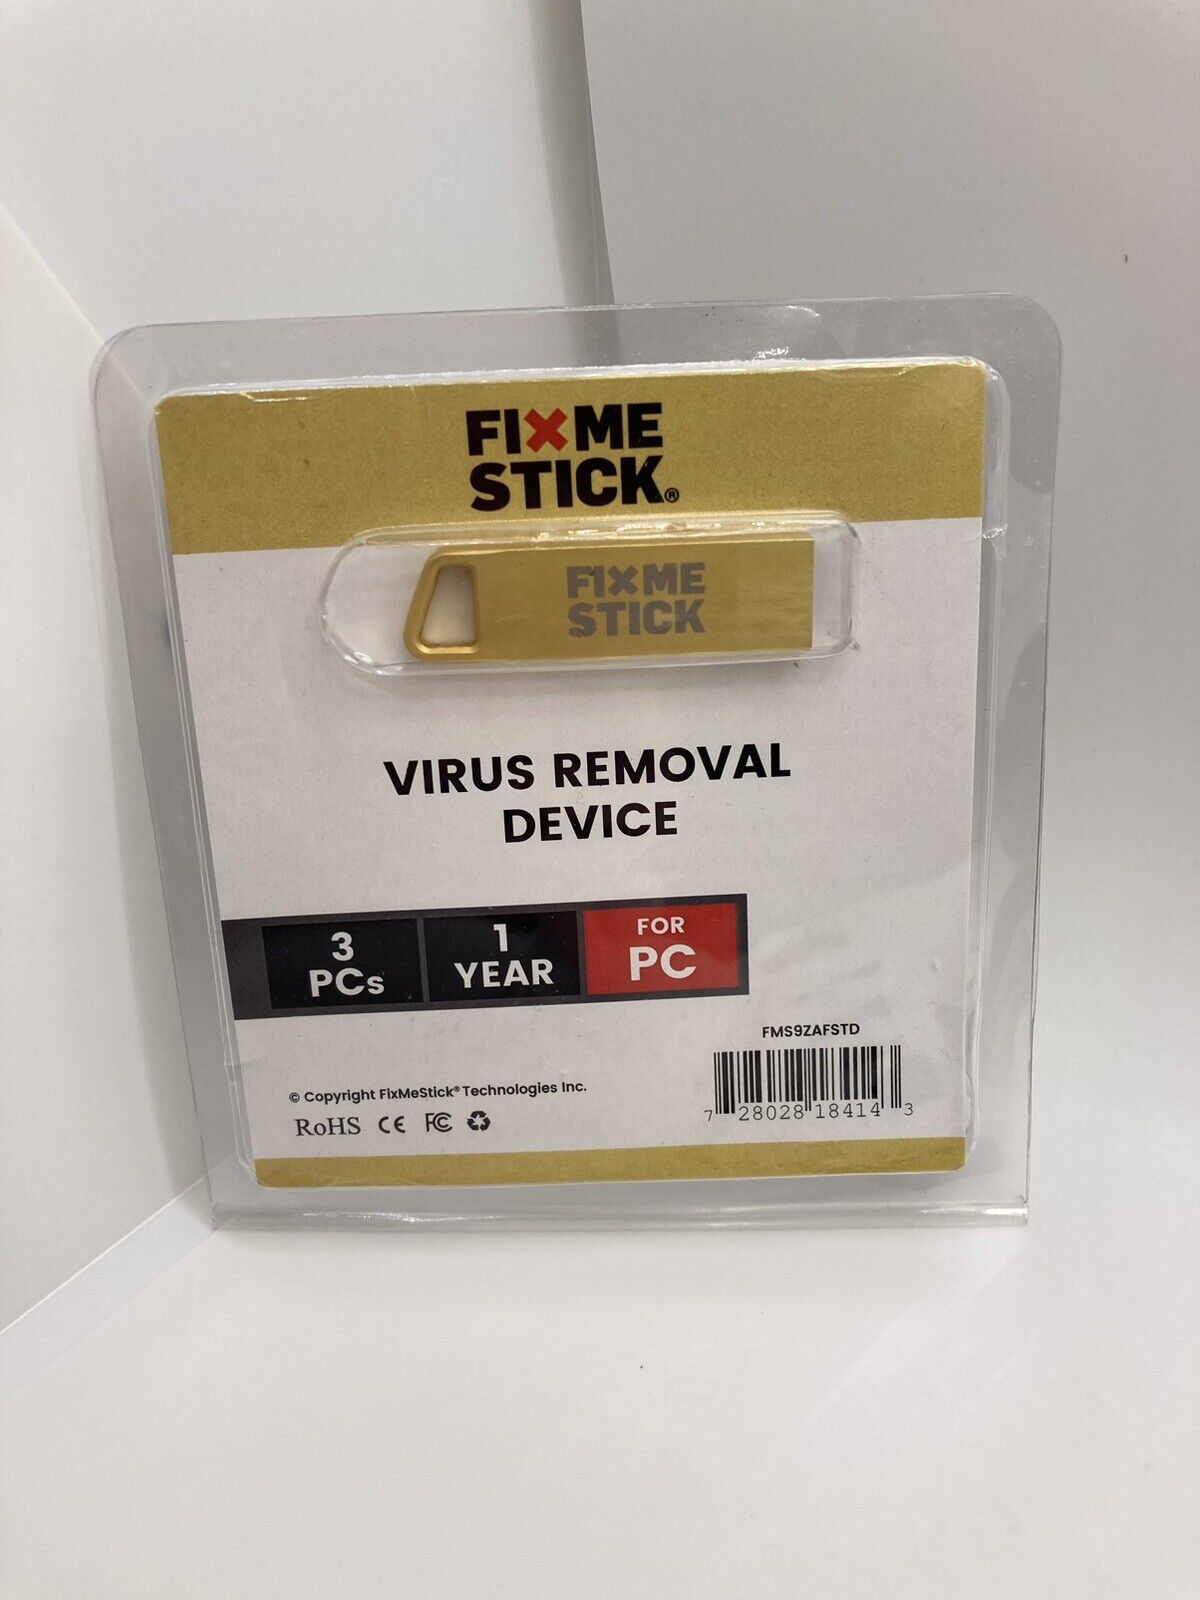 FixMeStick Gold Virus Removal Stick for Windows PCs - Use On Up To 3 PCs New